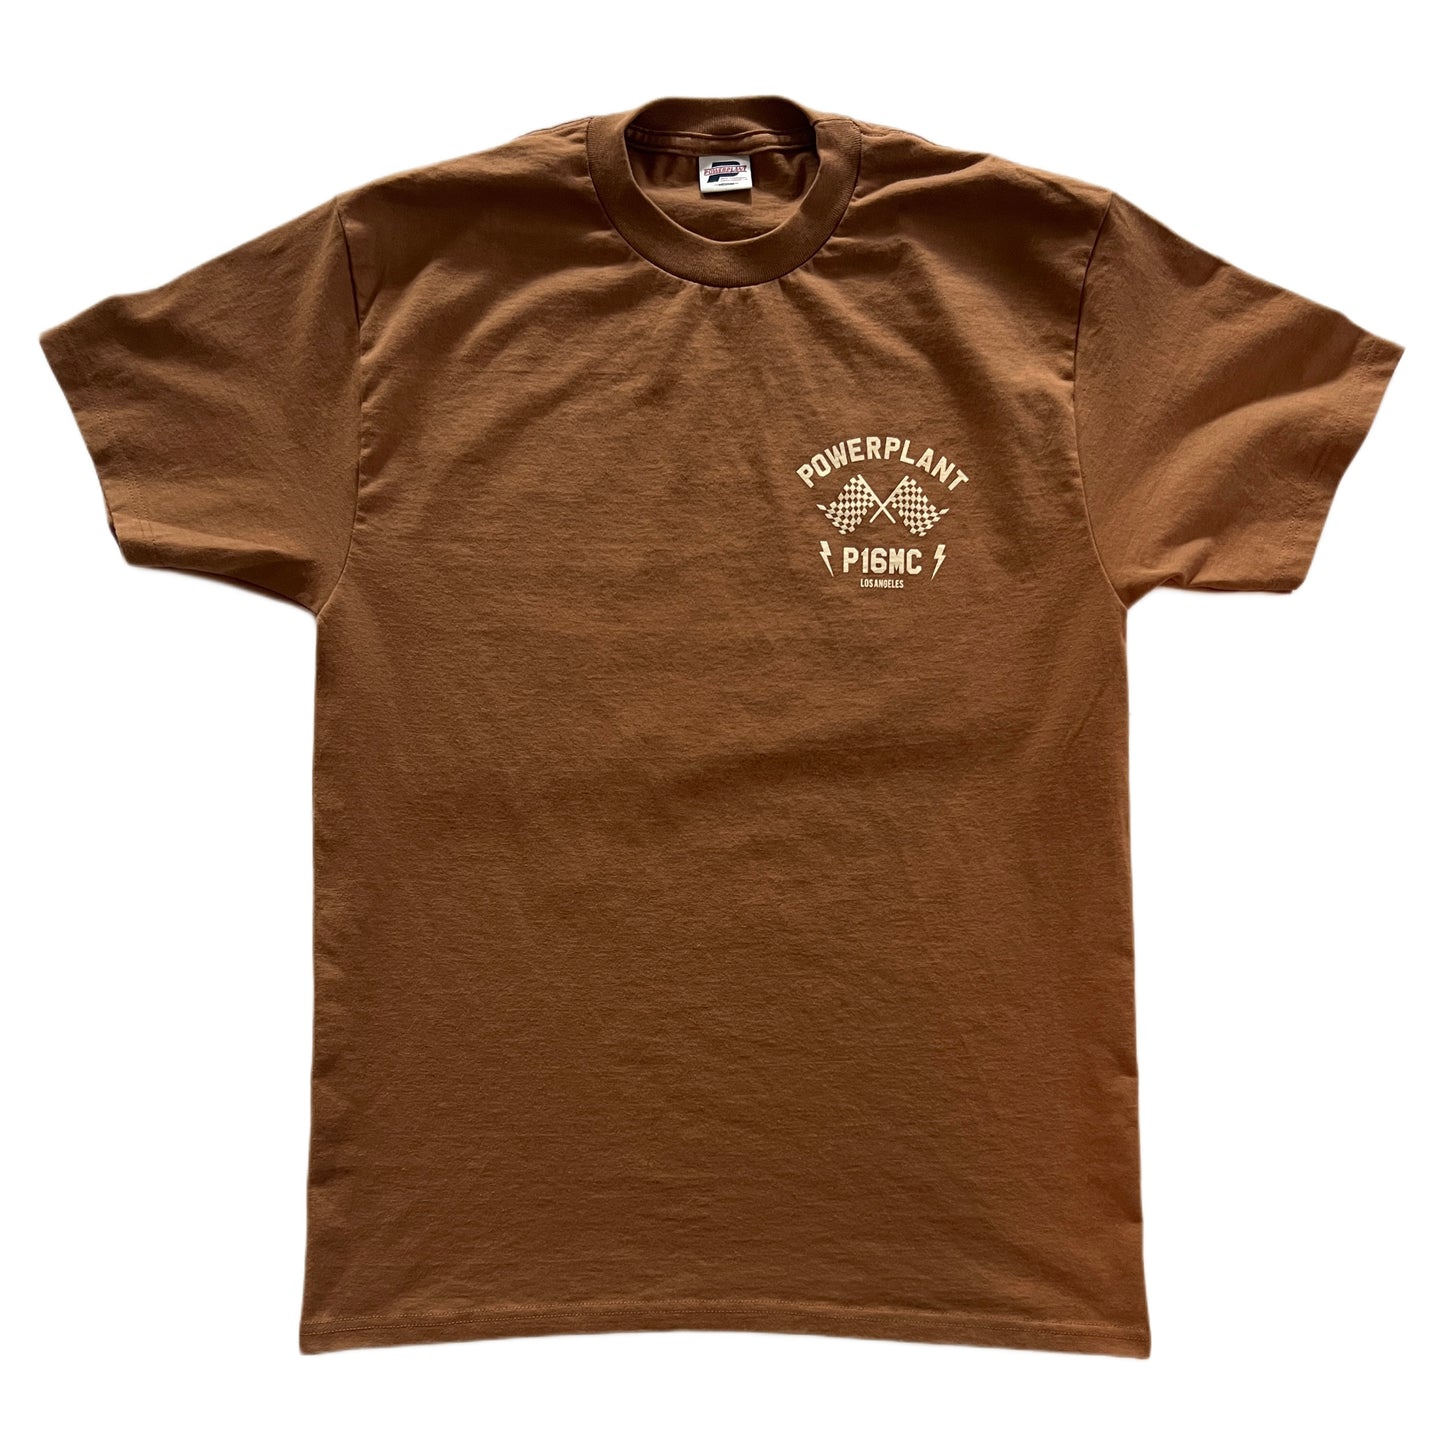 Powerplant Racing Flags Shop Classic S/S TEE - BROWN W/Offwhite Ink